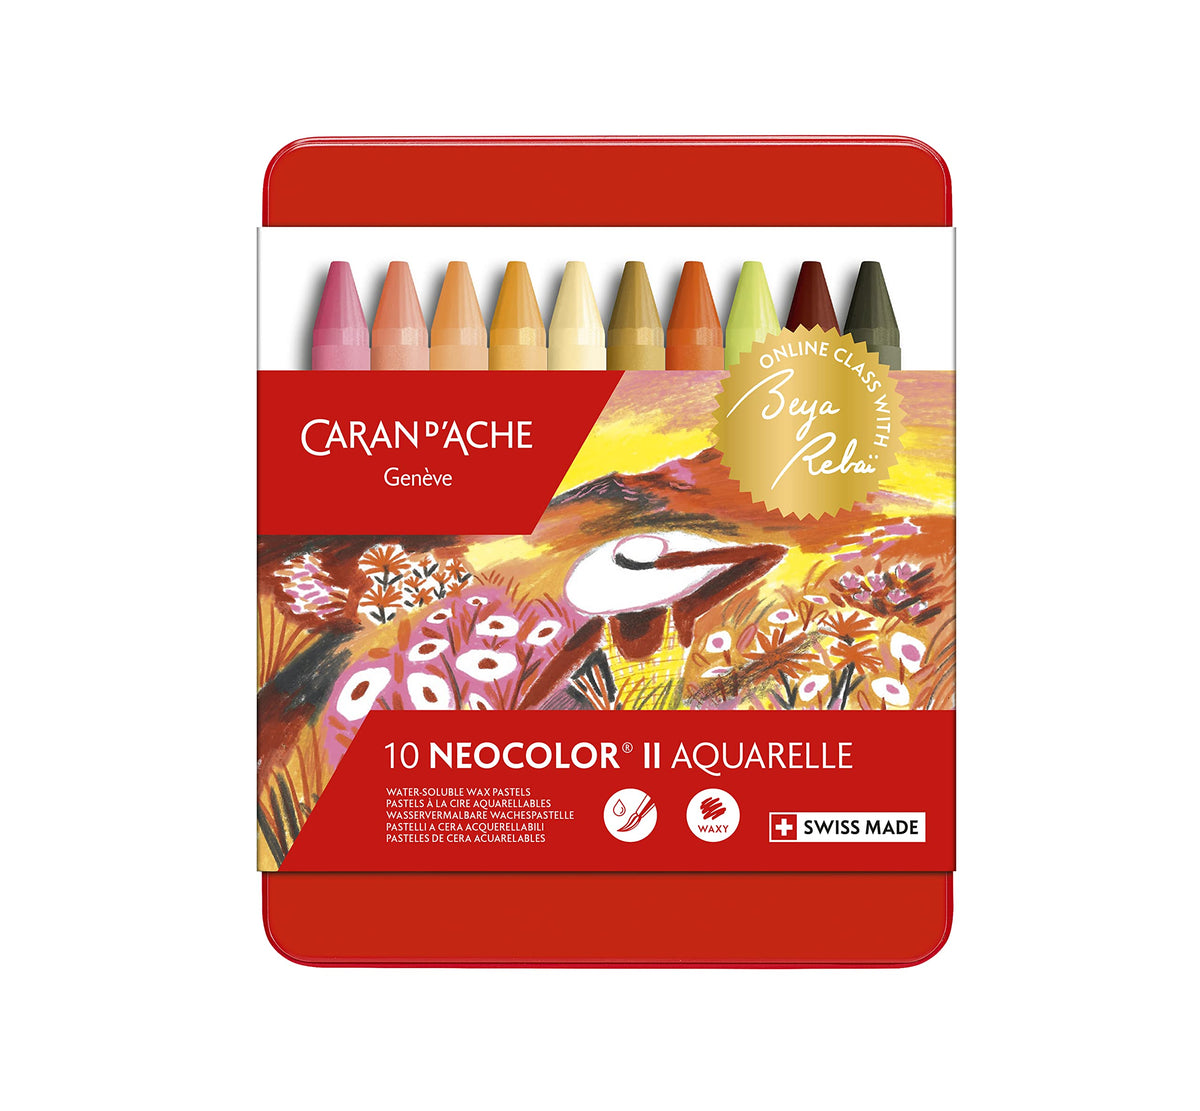 Caran D'Ache Classic Neocolor II Water-Soluble Crayons, 10 Assorted Colors